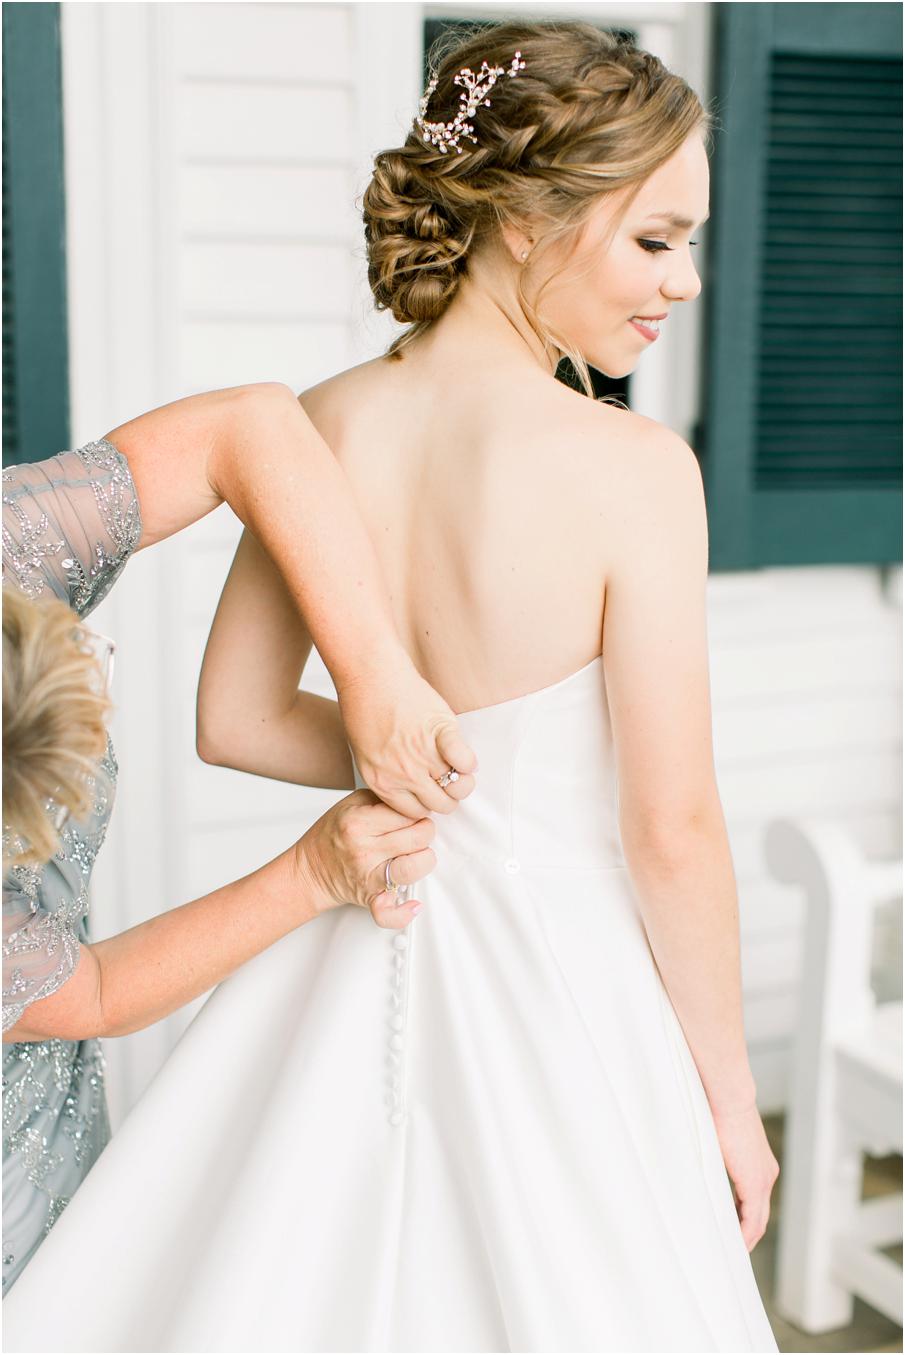 Mom buttoning up her daughter's wedding dress on a porch for her Pharsalia wedding day